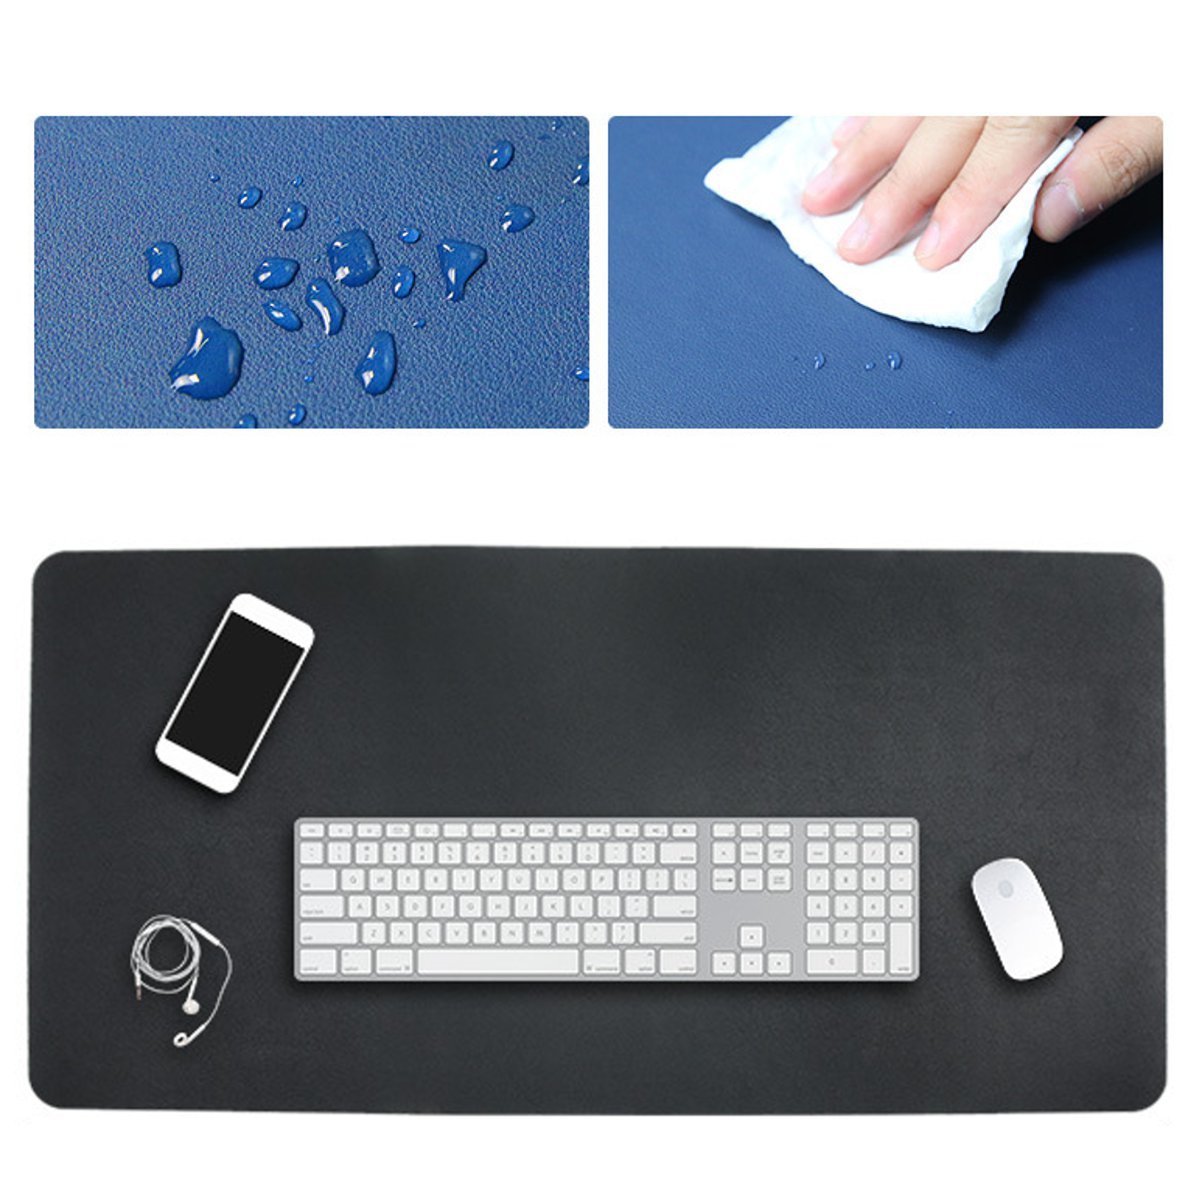 60x120cm Large Mouse Pad Both Sides Use Extra Large PU Leather Mouse Pad Mat Desktop Table Protective Mat for Home Office Gaming 2